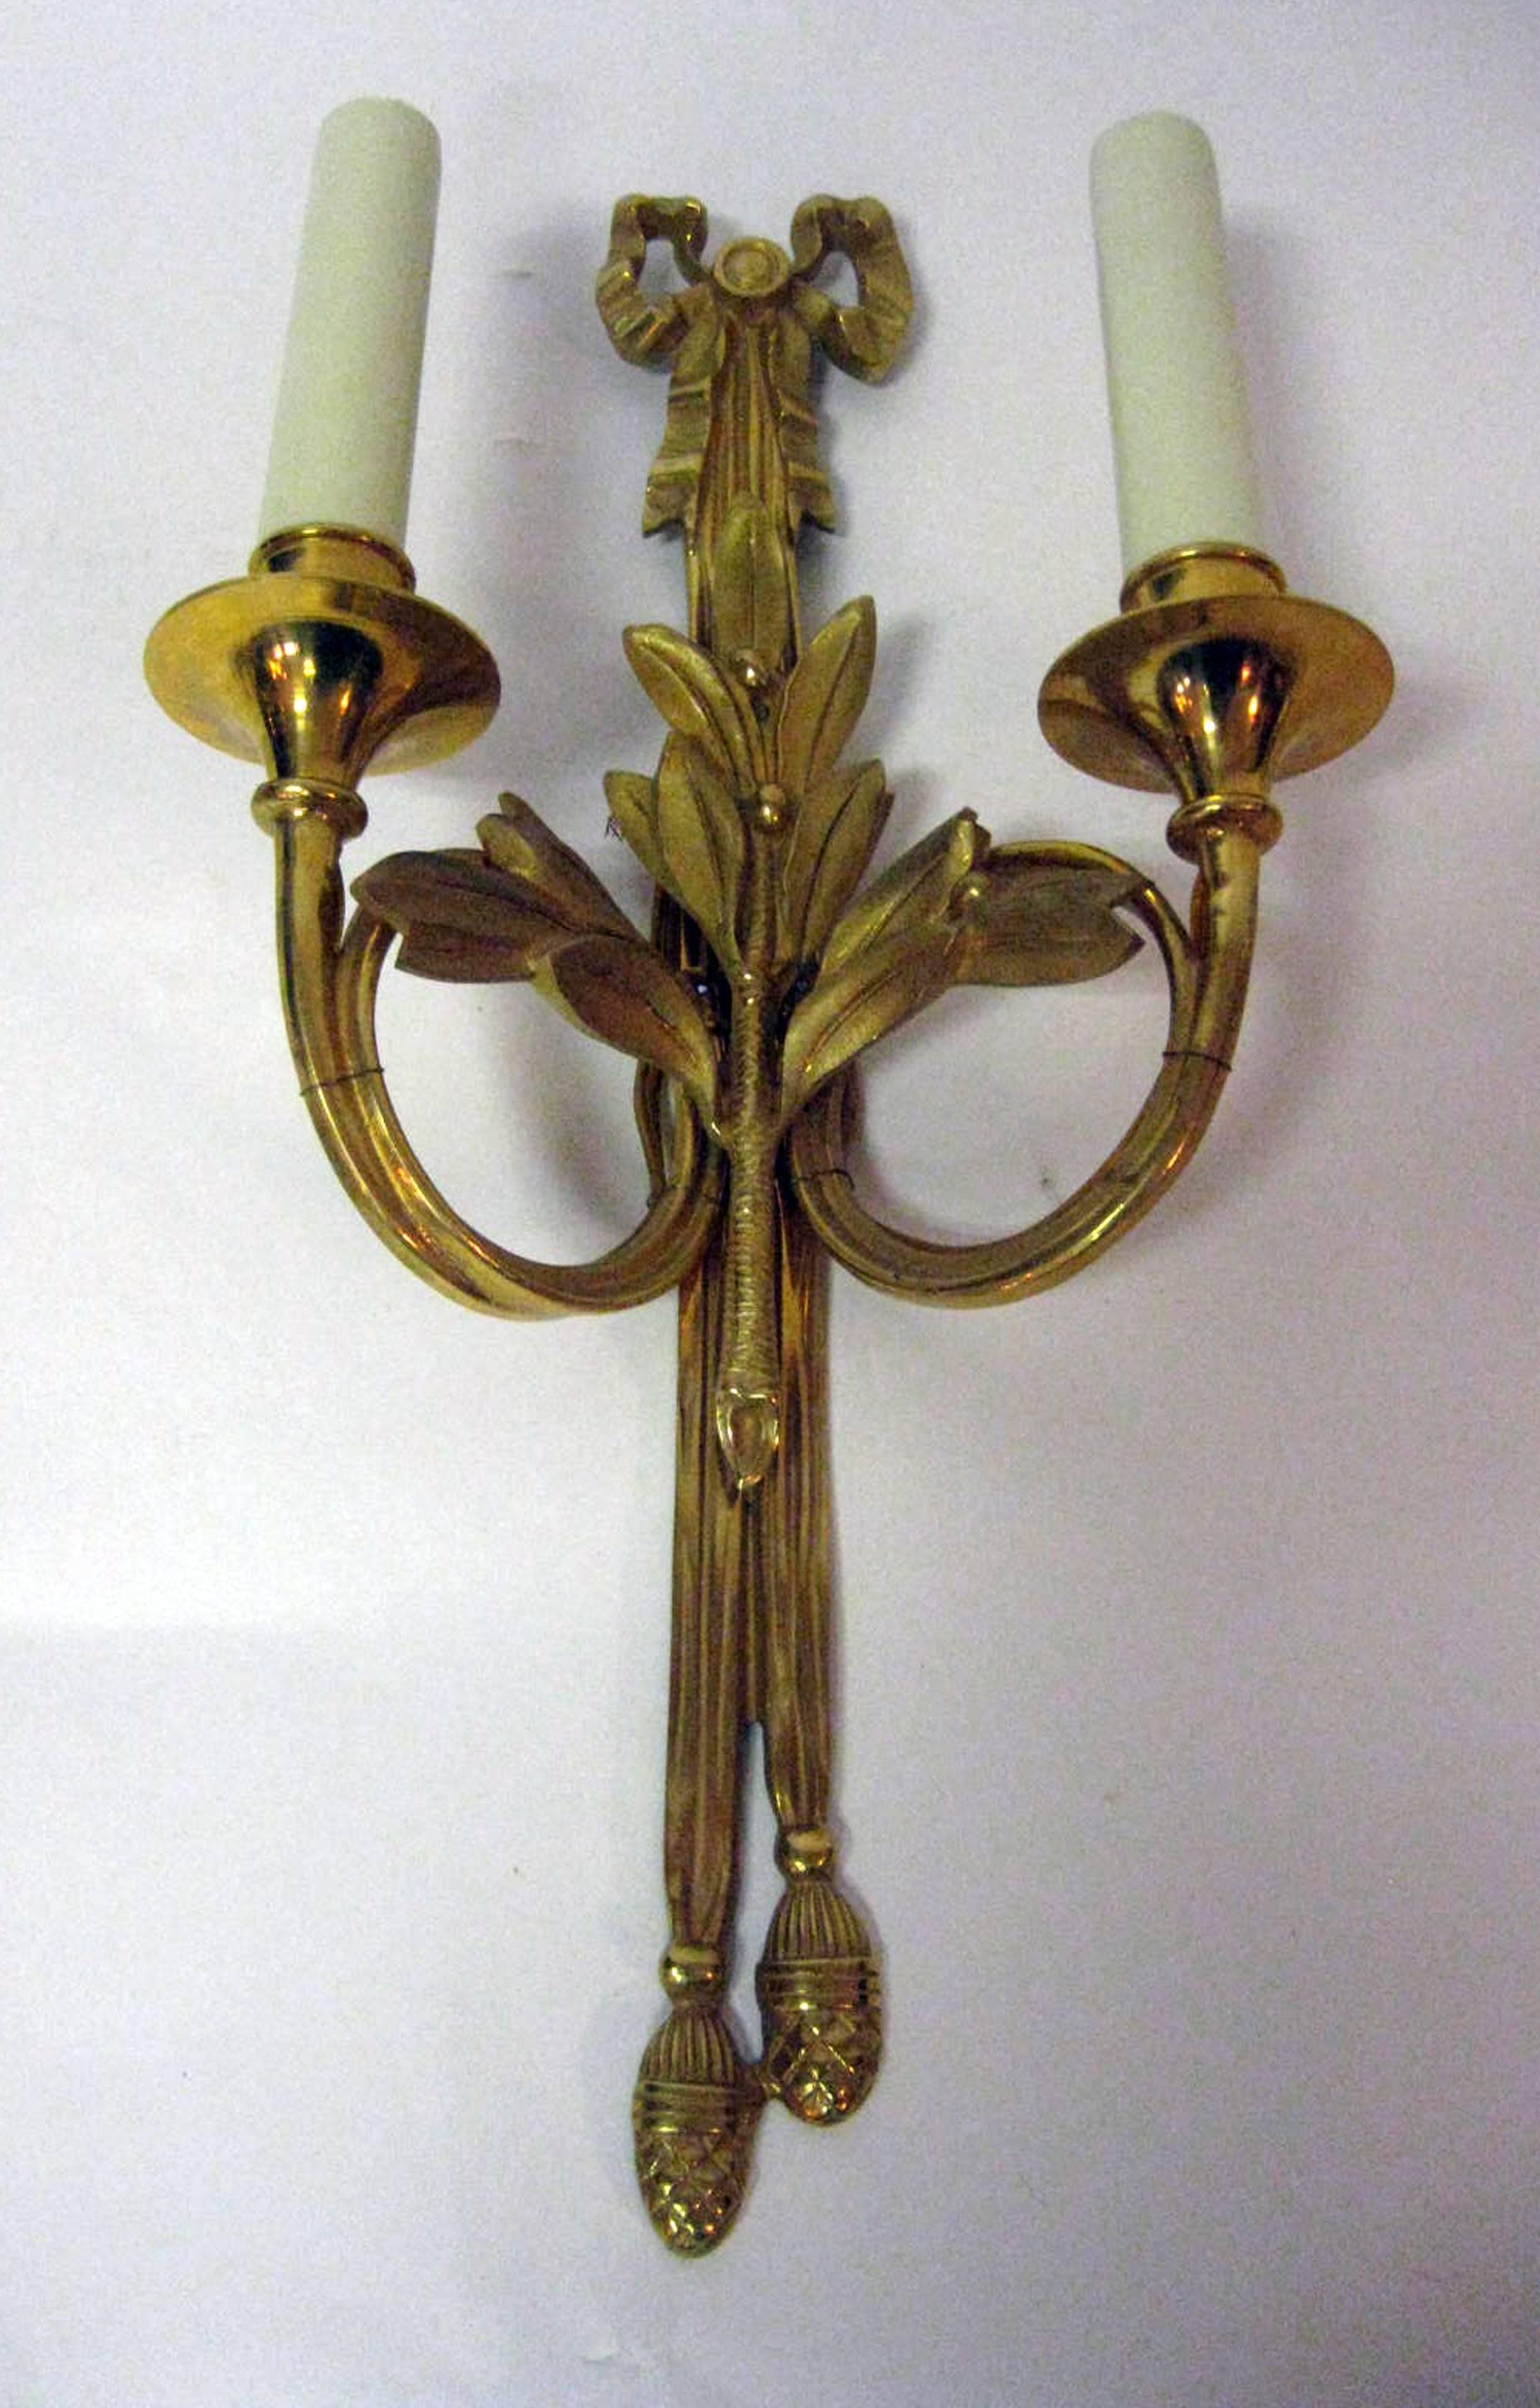 Four gold gilded bronze French wall sconces. Featuring all the bells and whistles; laurel clusters, pine cones and graceful ribbons and bows, they would make a lovely addition to any room. Wired and ready to be installed. See measurements below.